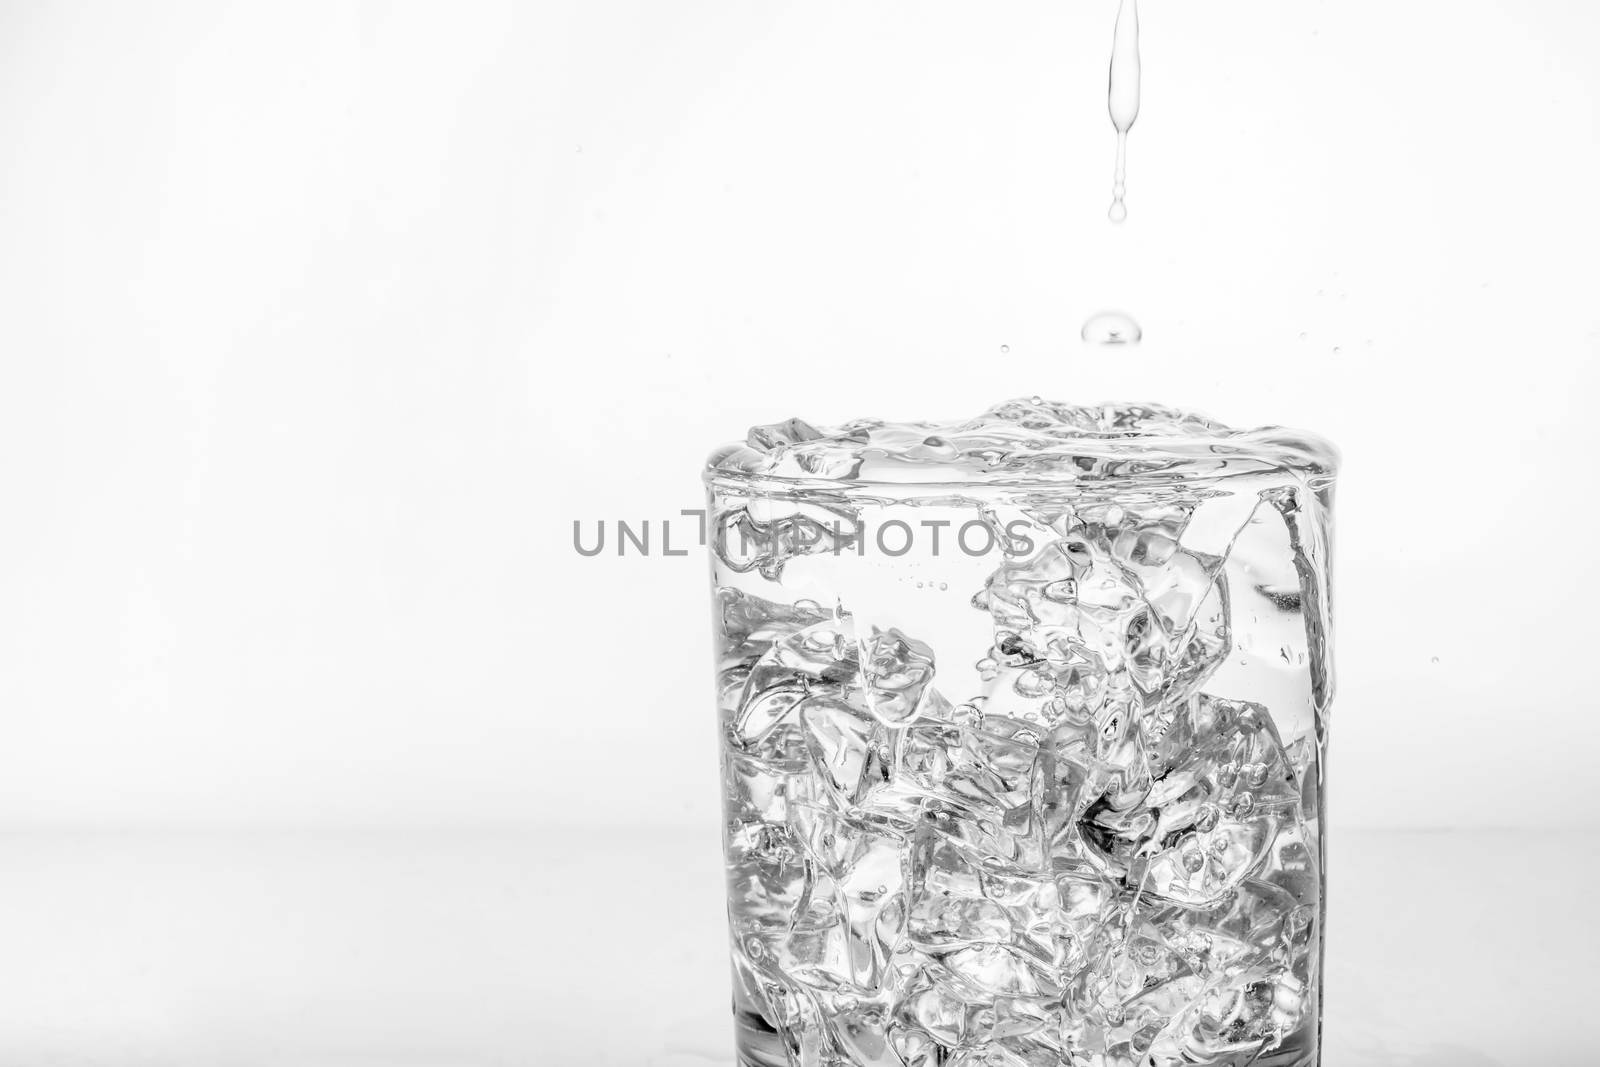 glass with ice and splashing water